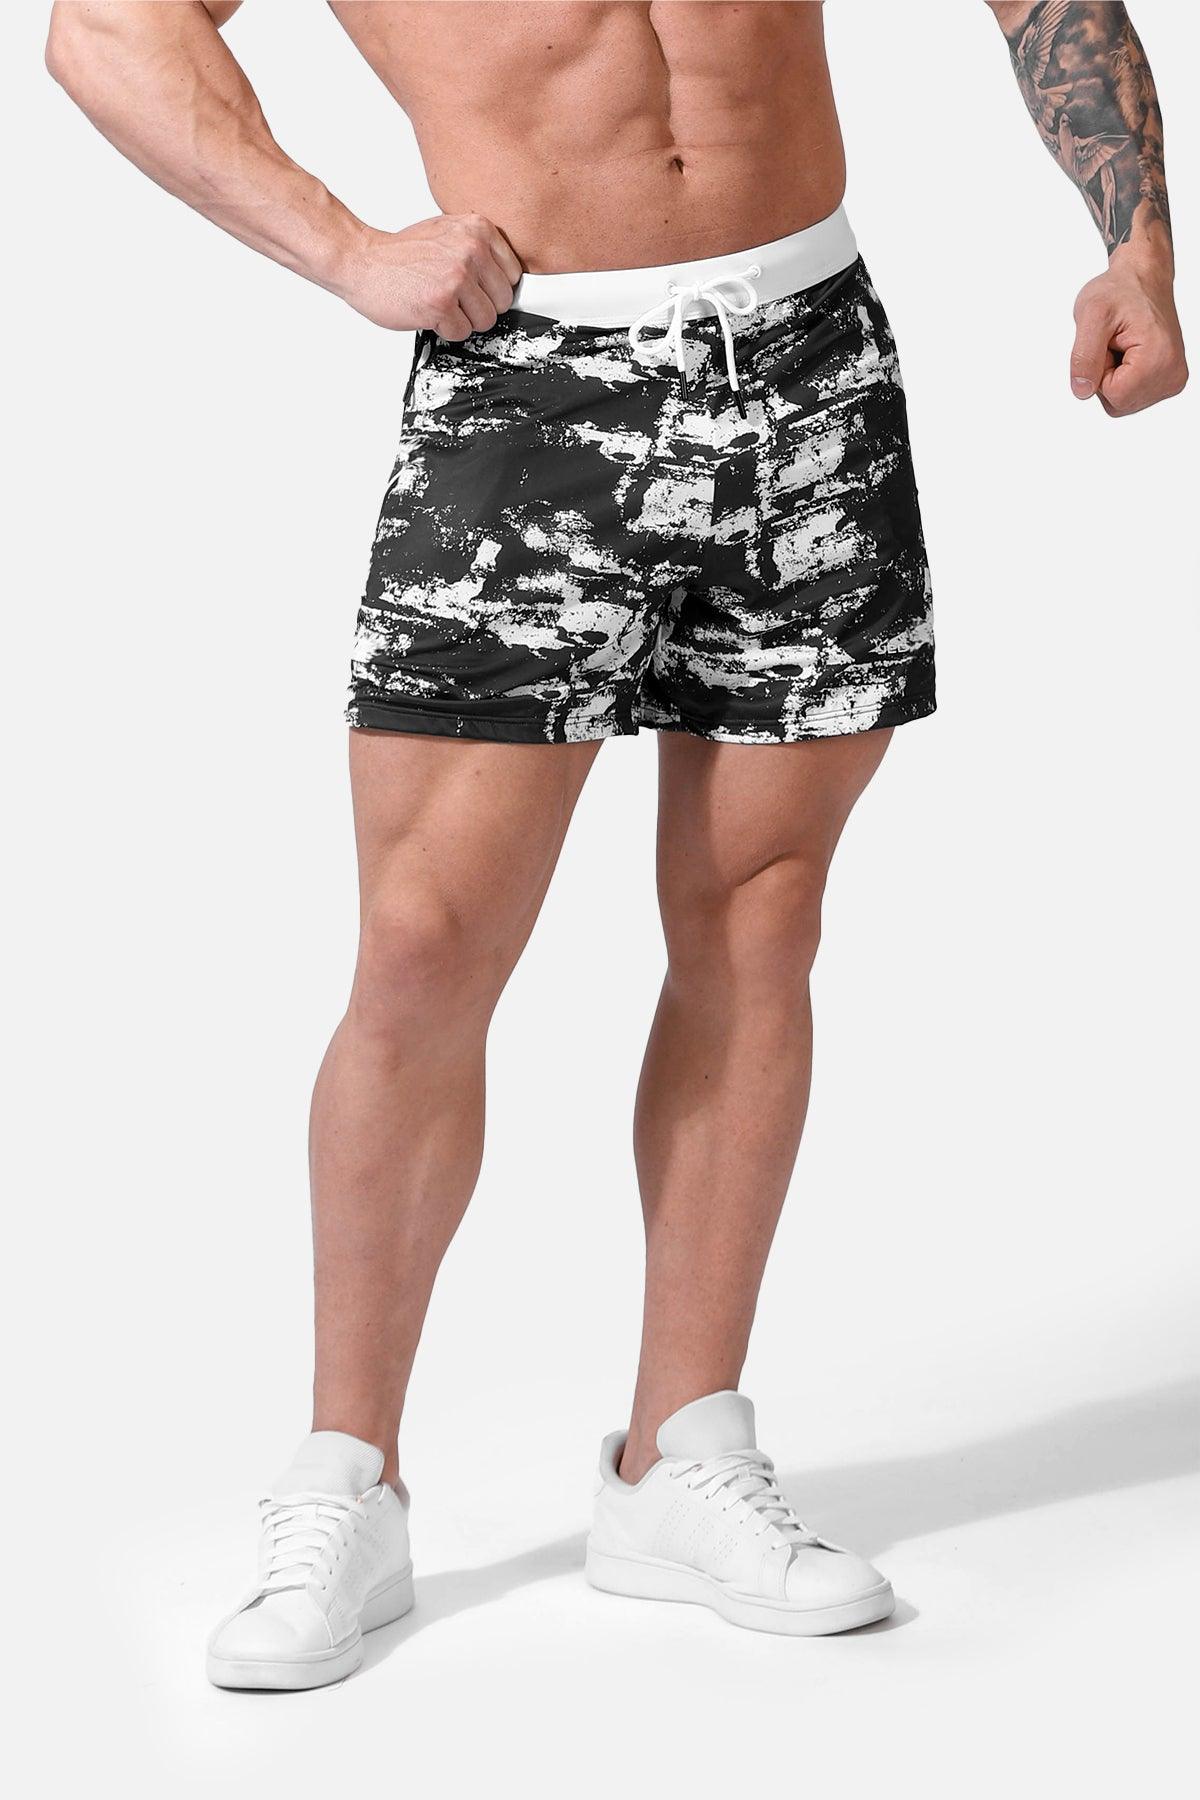 Ace Graphic Casual 5" Shorts 2.0 - Black Brush - Jed North Canada